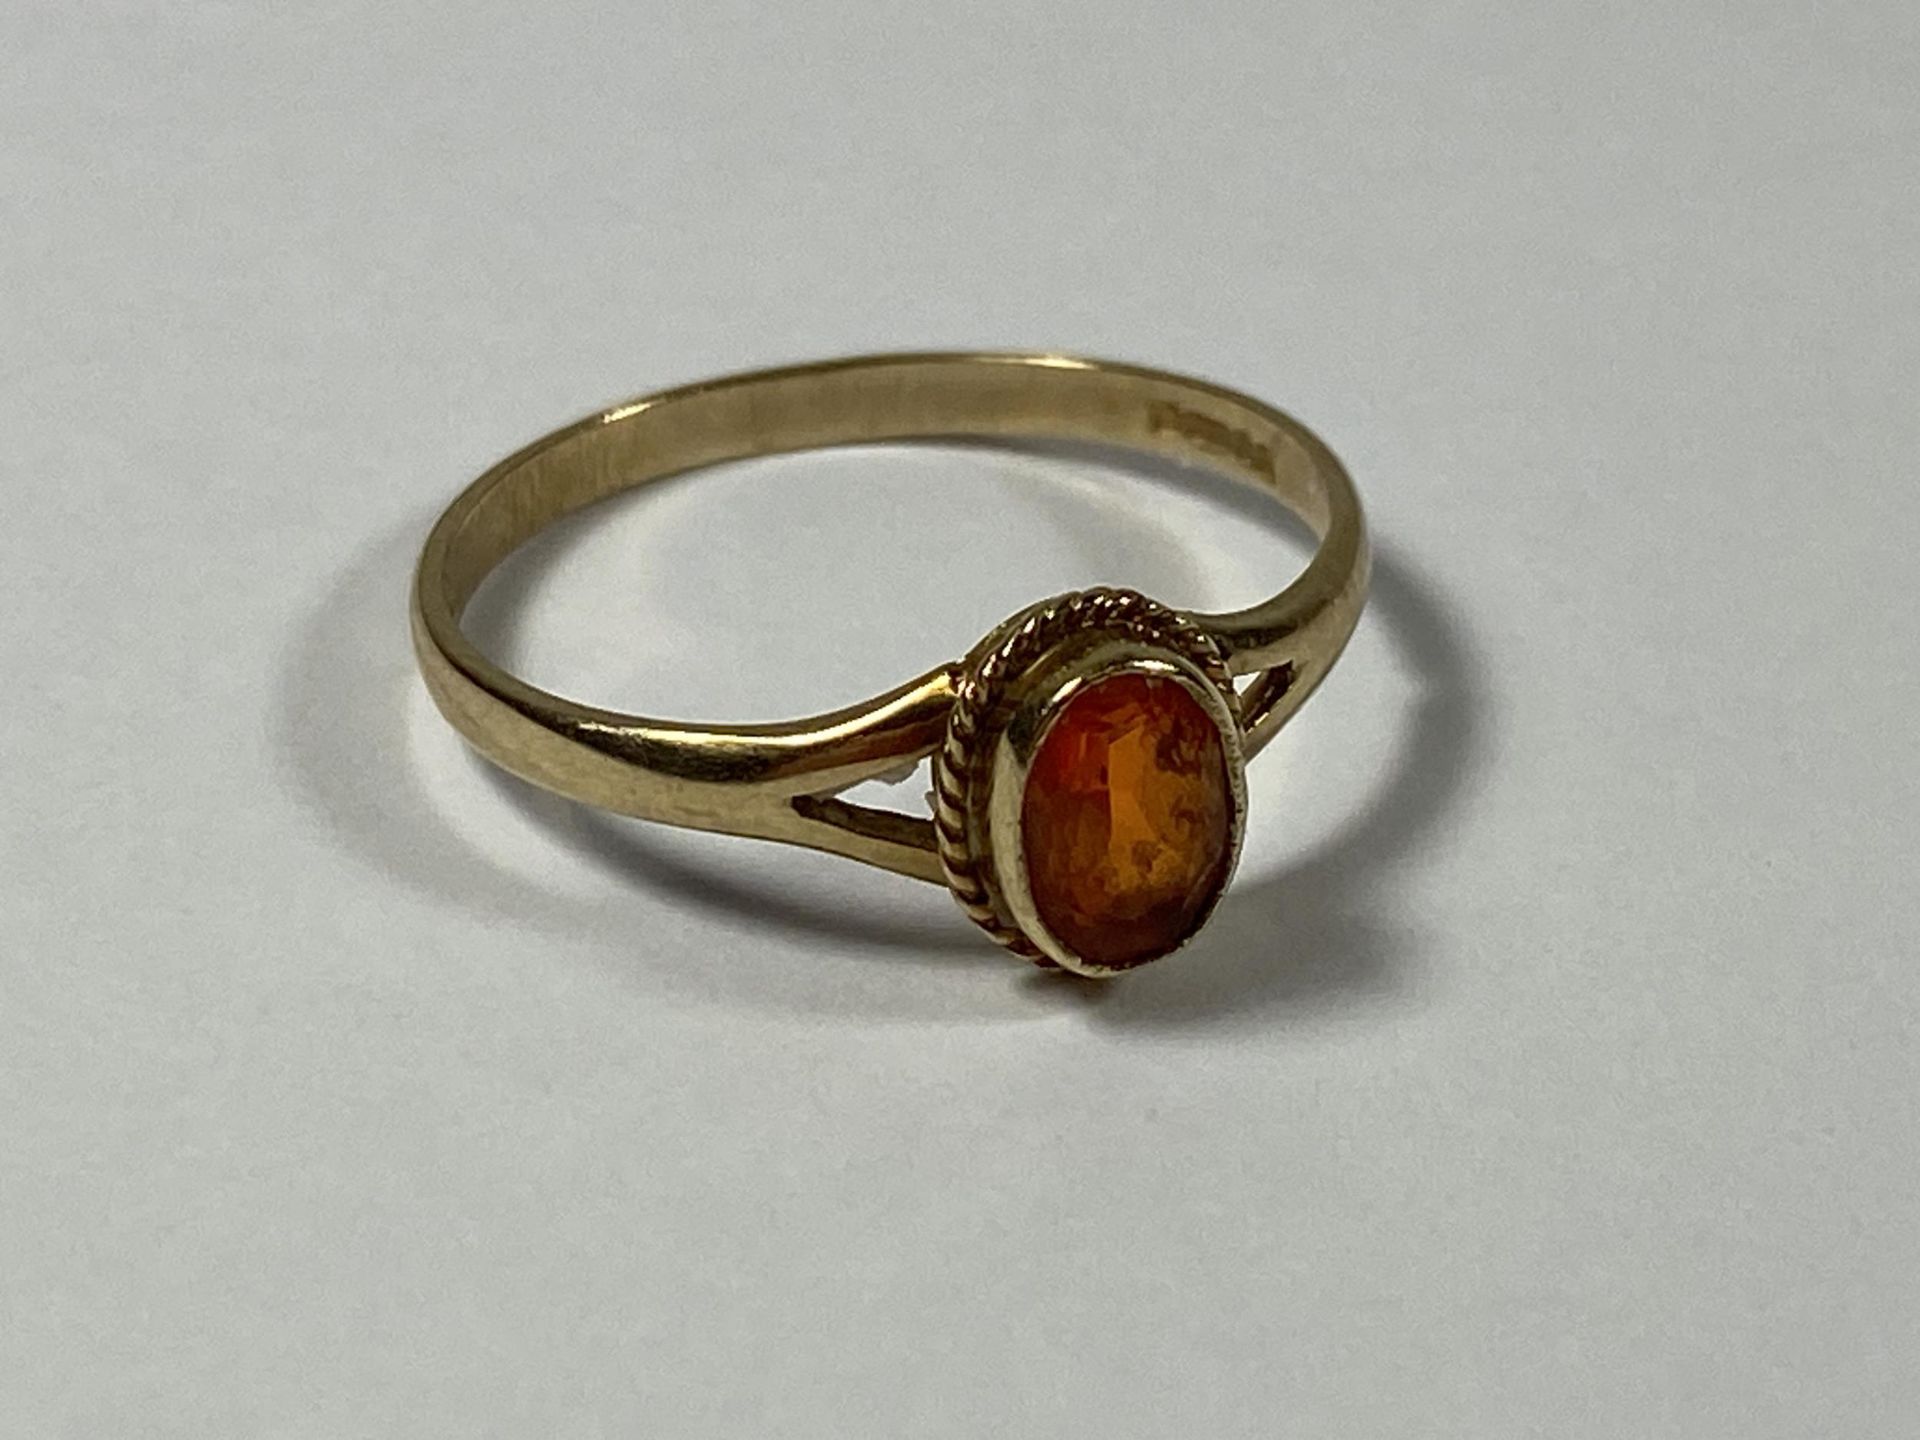 A 9CT GOLD RING WITH ORANGE STONE, WEIGHT 1.3G